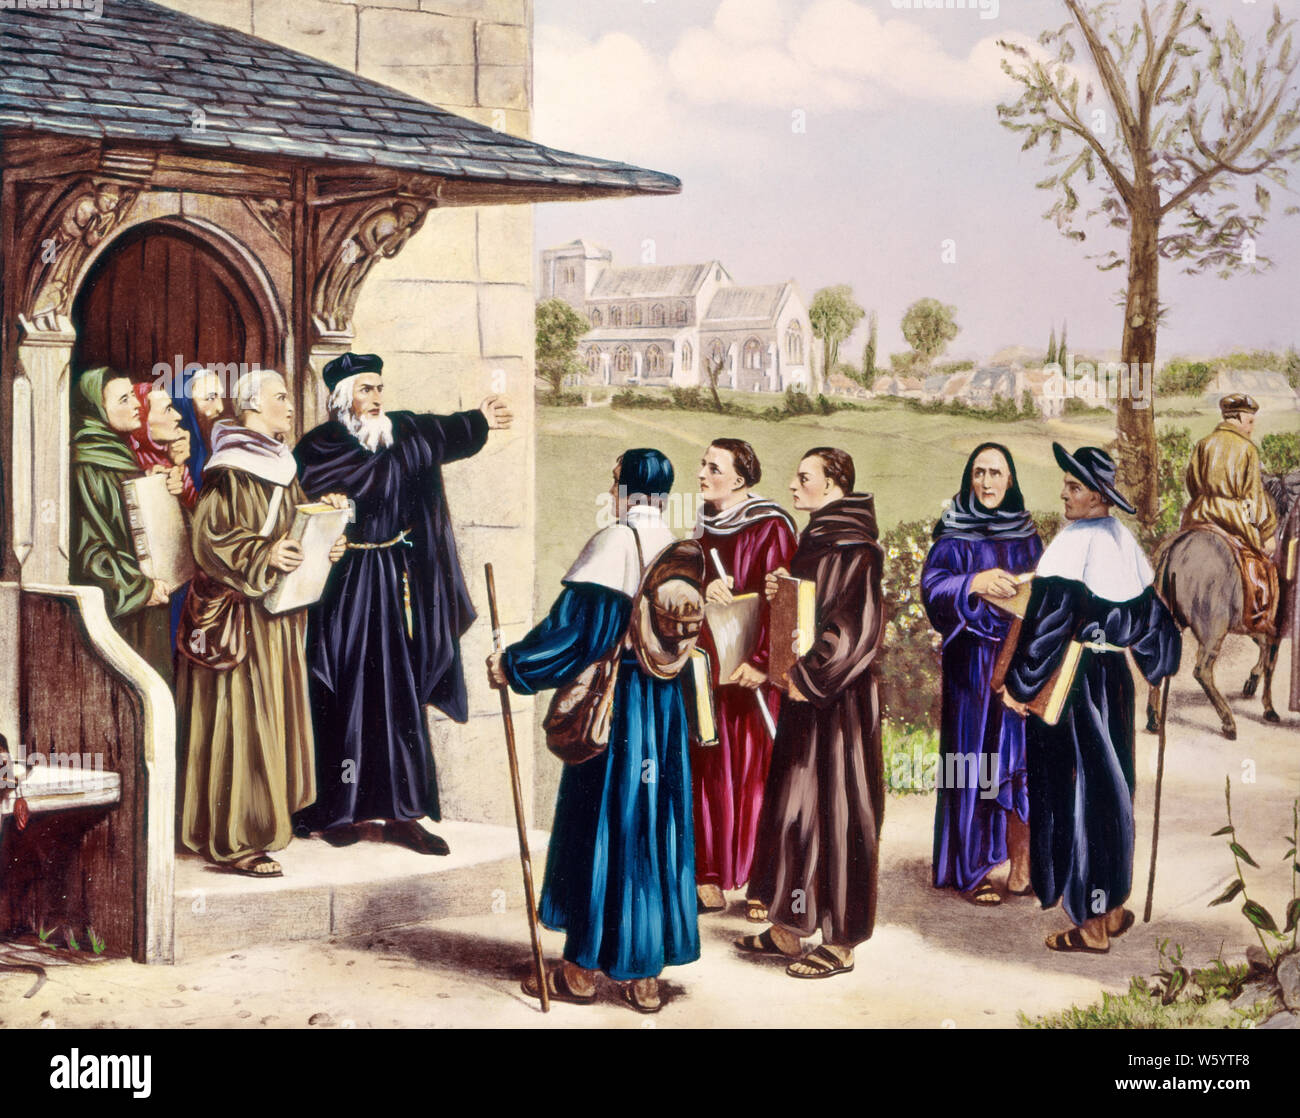 1500s 1536 DAWN OF THE REFORMATION AN OLDER MARTIN LUTHER SPEAKING TO MONKS AND PILGRIMS  - kr11243 SPL001 HARS LUTHERAN 1500s EXCOMMUNICATED MONKS OLD FASHIONED PROTESTANT REFORMATION THEOLOGIAN VERNACULAR Stock Photo